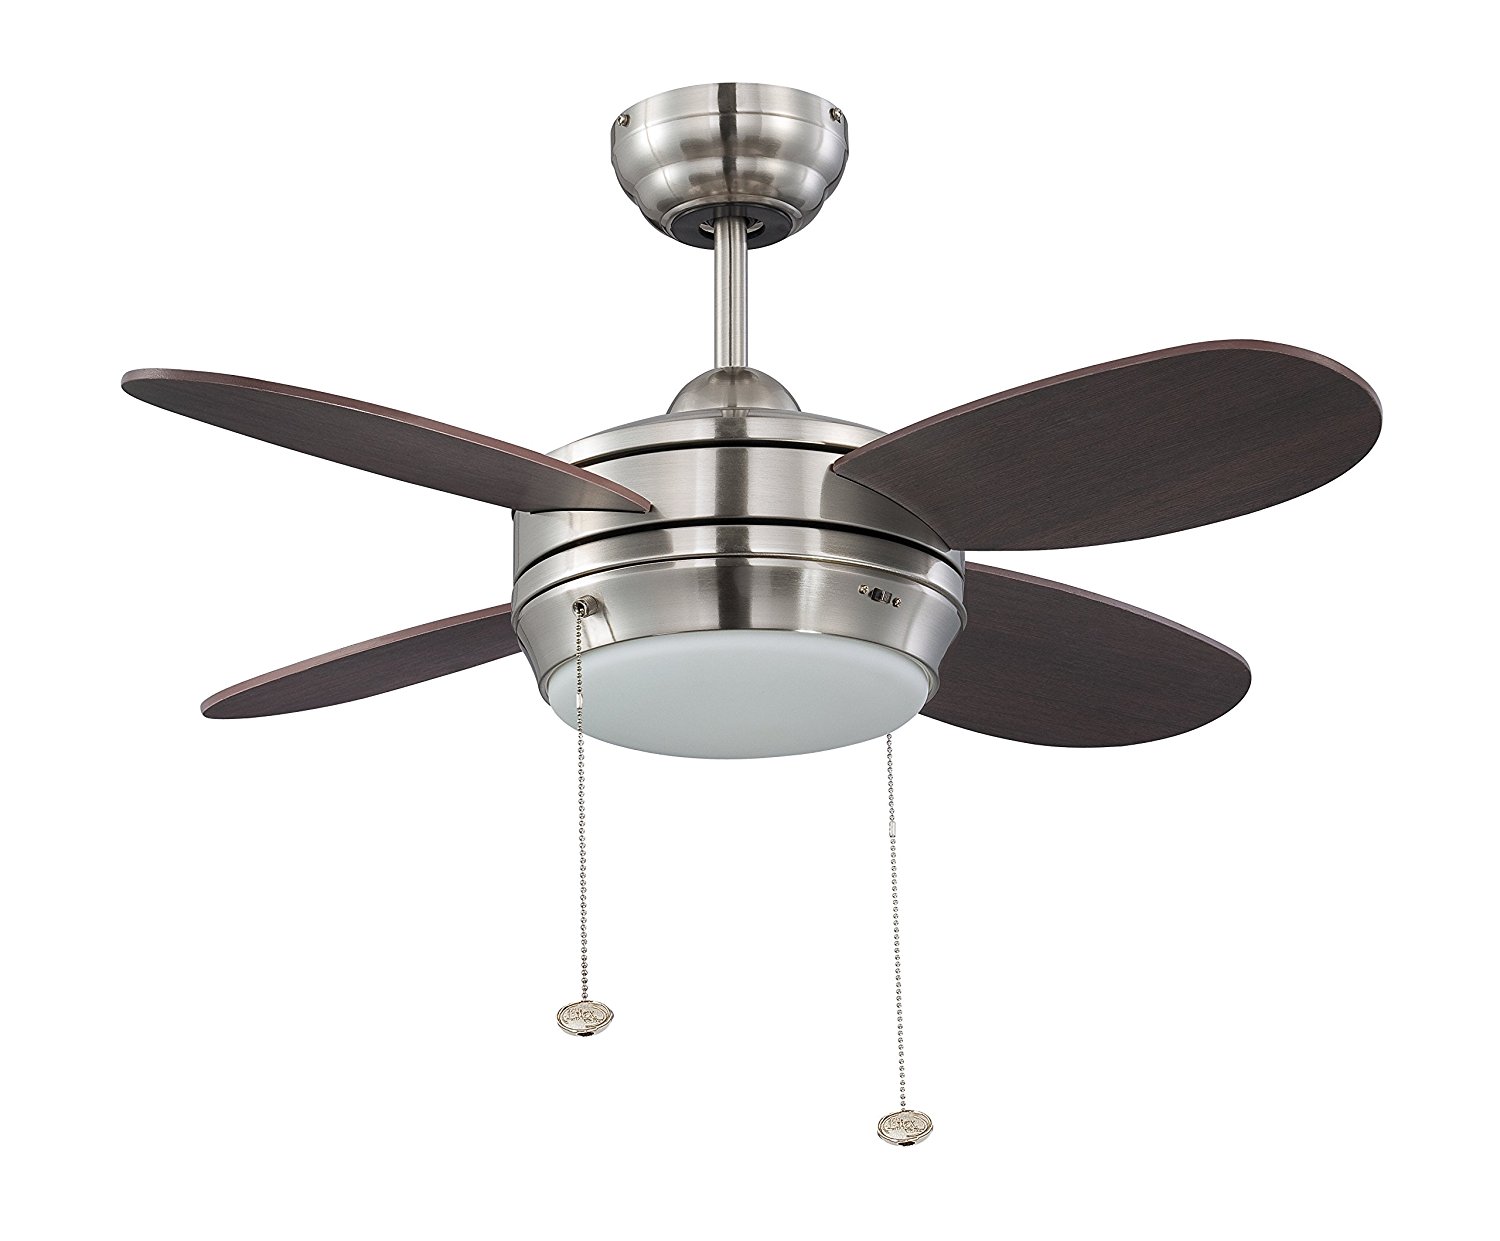 Litex E-MLV36BNK4LK1 Maksim Collection 36-Inch Ceiling Fan with Five Wench Wood Blades and Single Light Kit with Opal Frosted Glass